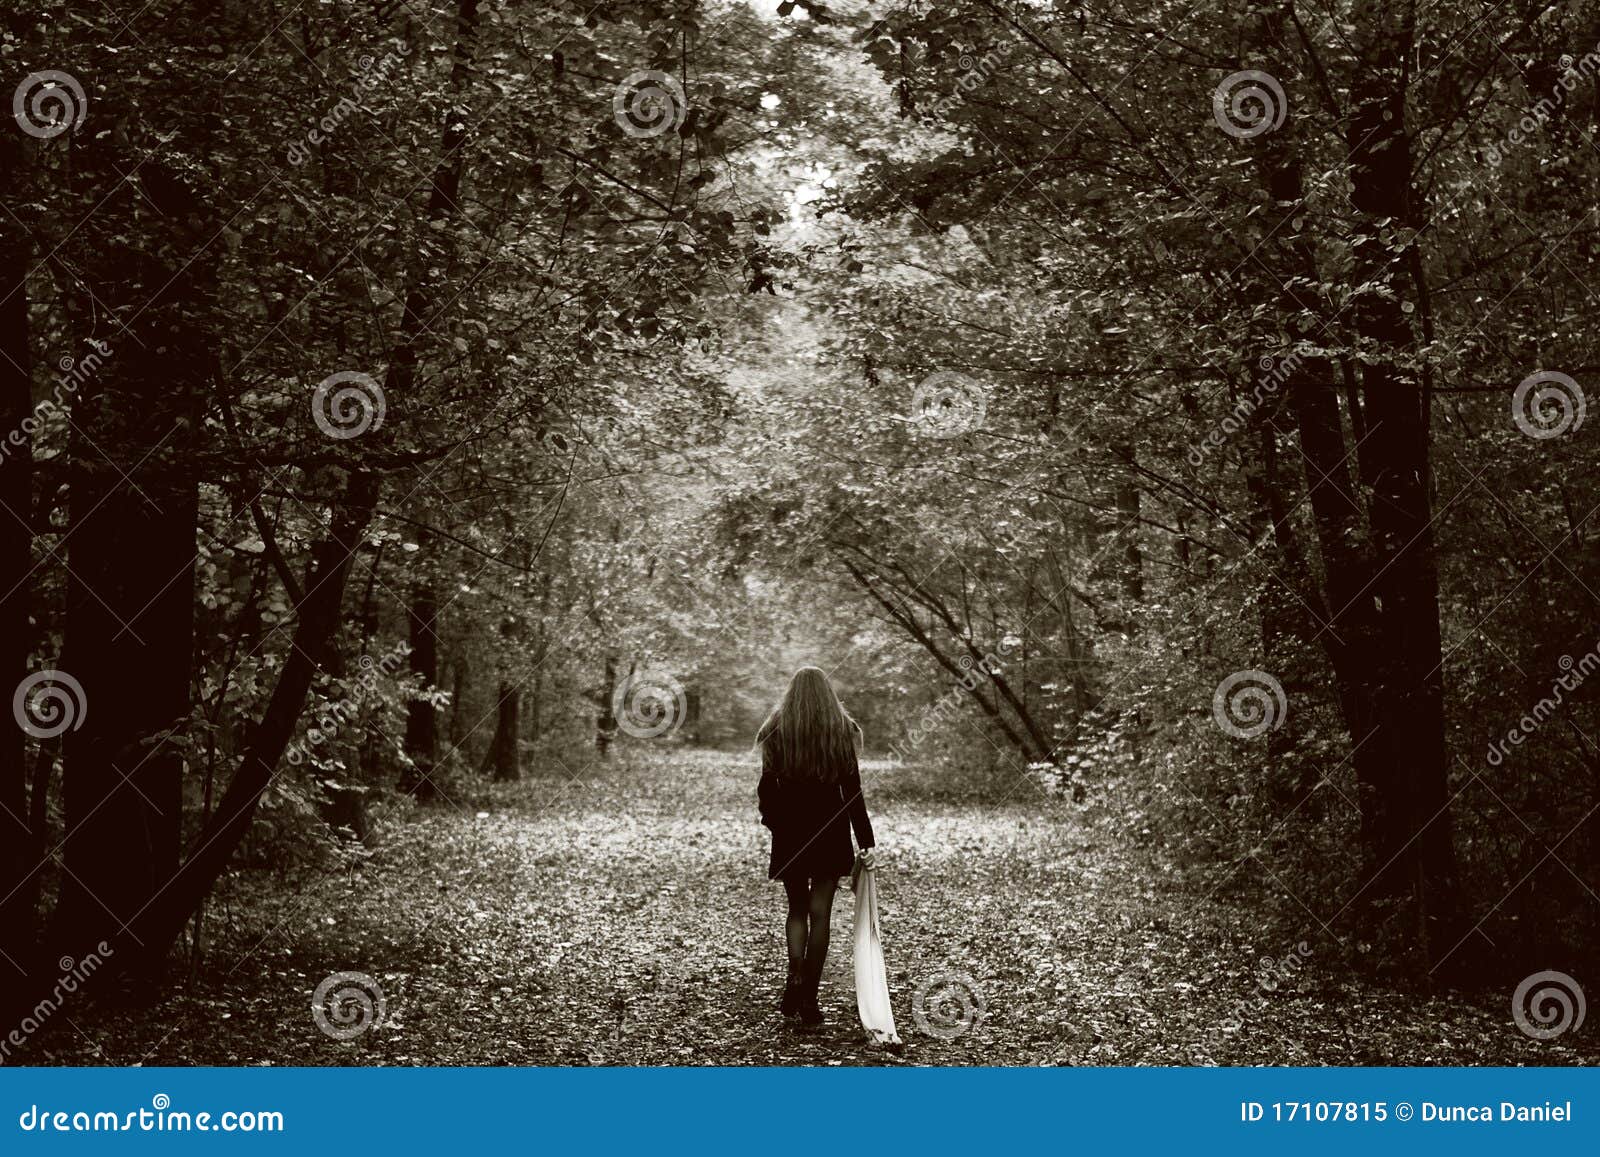 Lonely Sad Woman on the Wood Road Stock Image - Image of beautiful ...